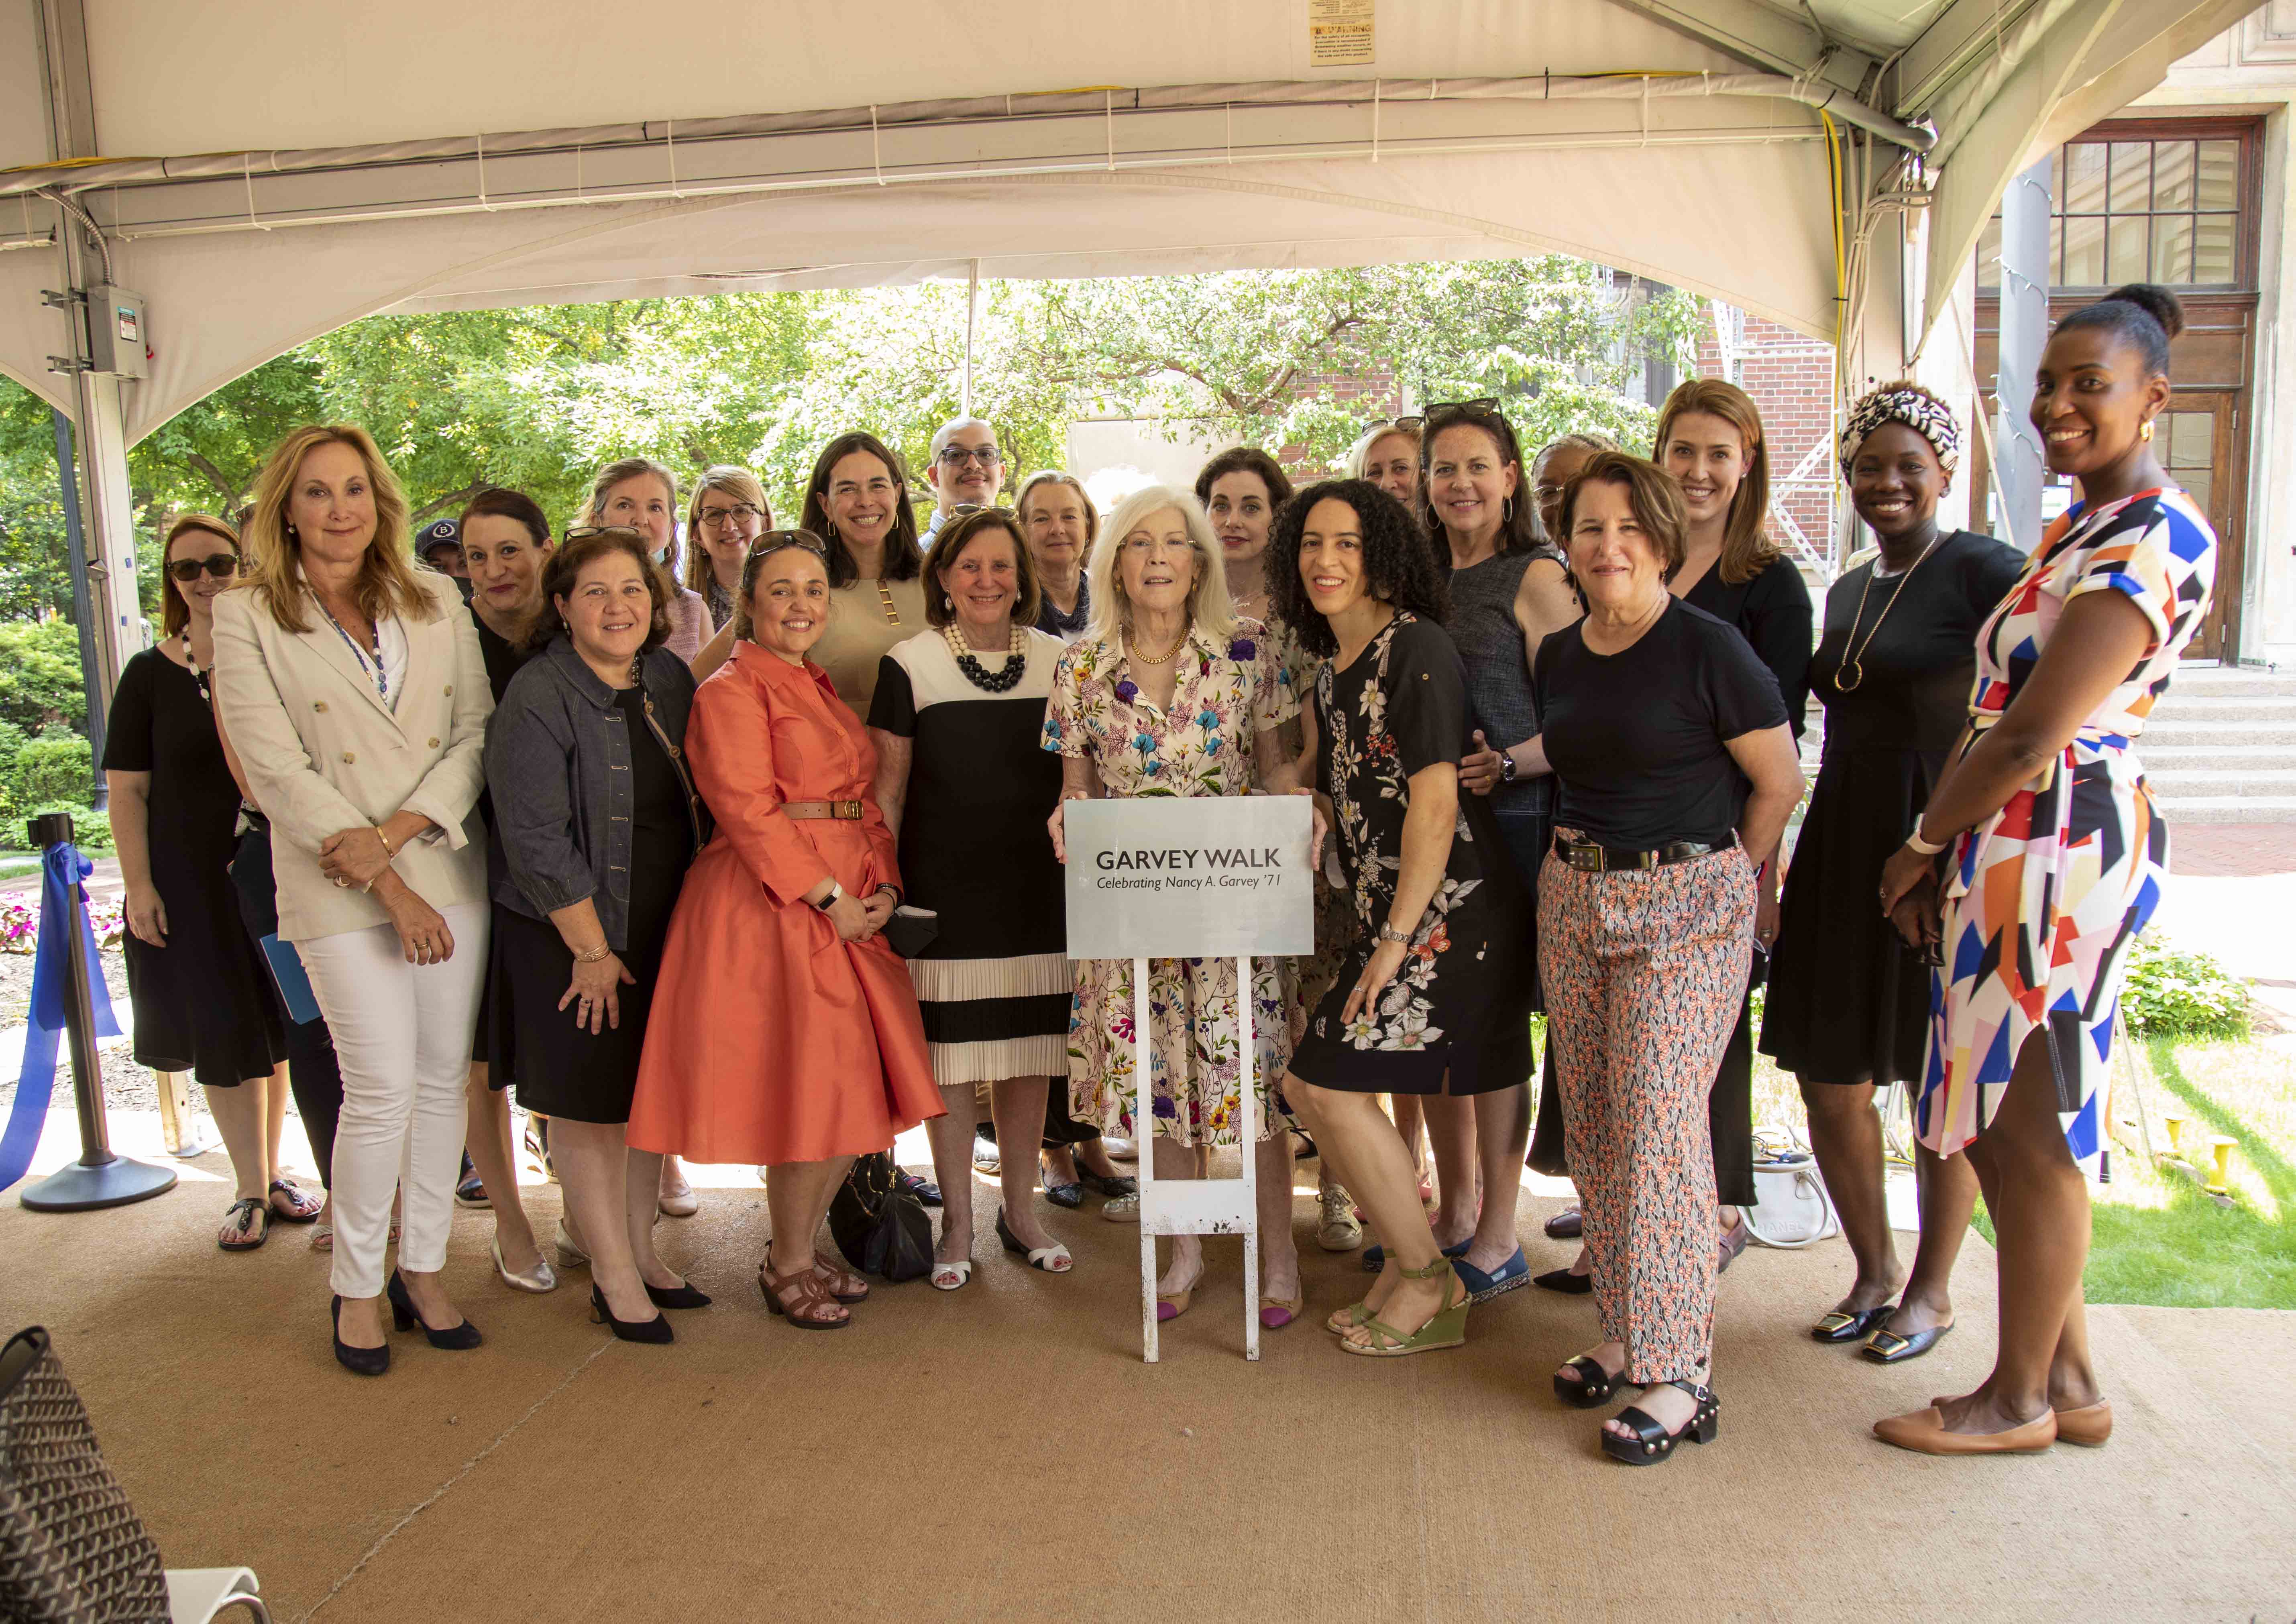 Nancy Garvey '71 holding the new "Garvey Walkway" sign, surrounded by friends, family, Barnard staff, and trustees